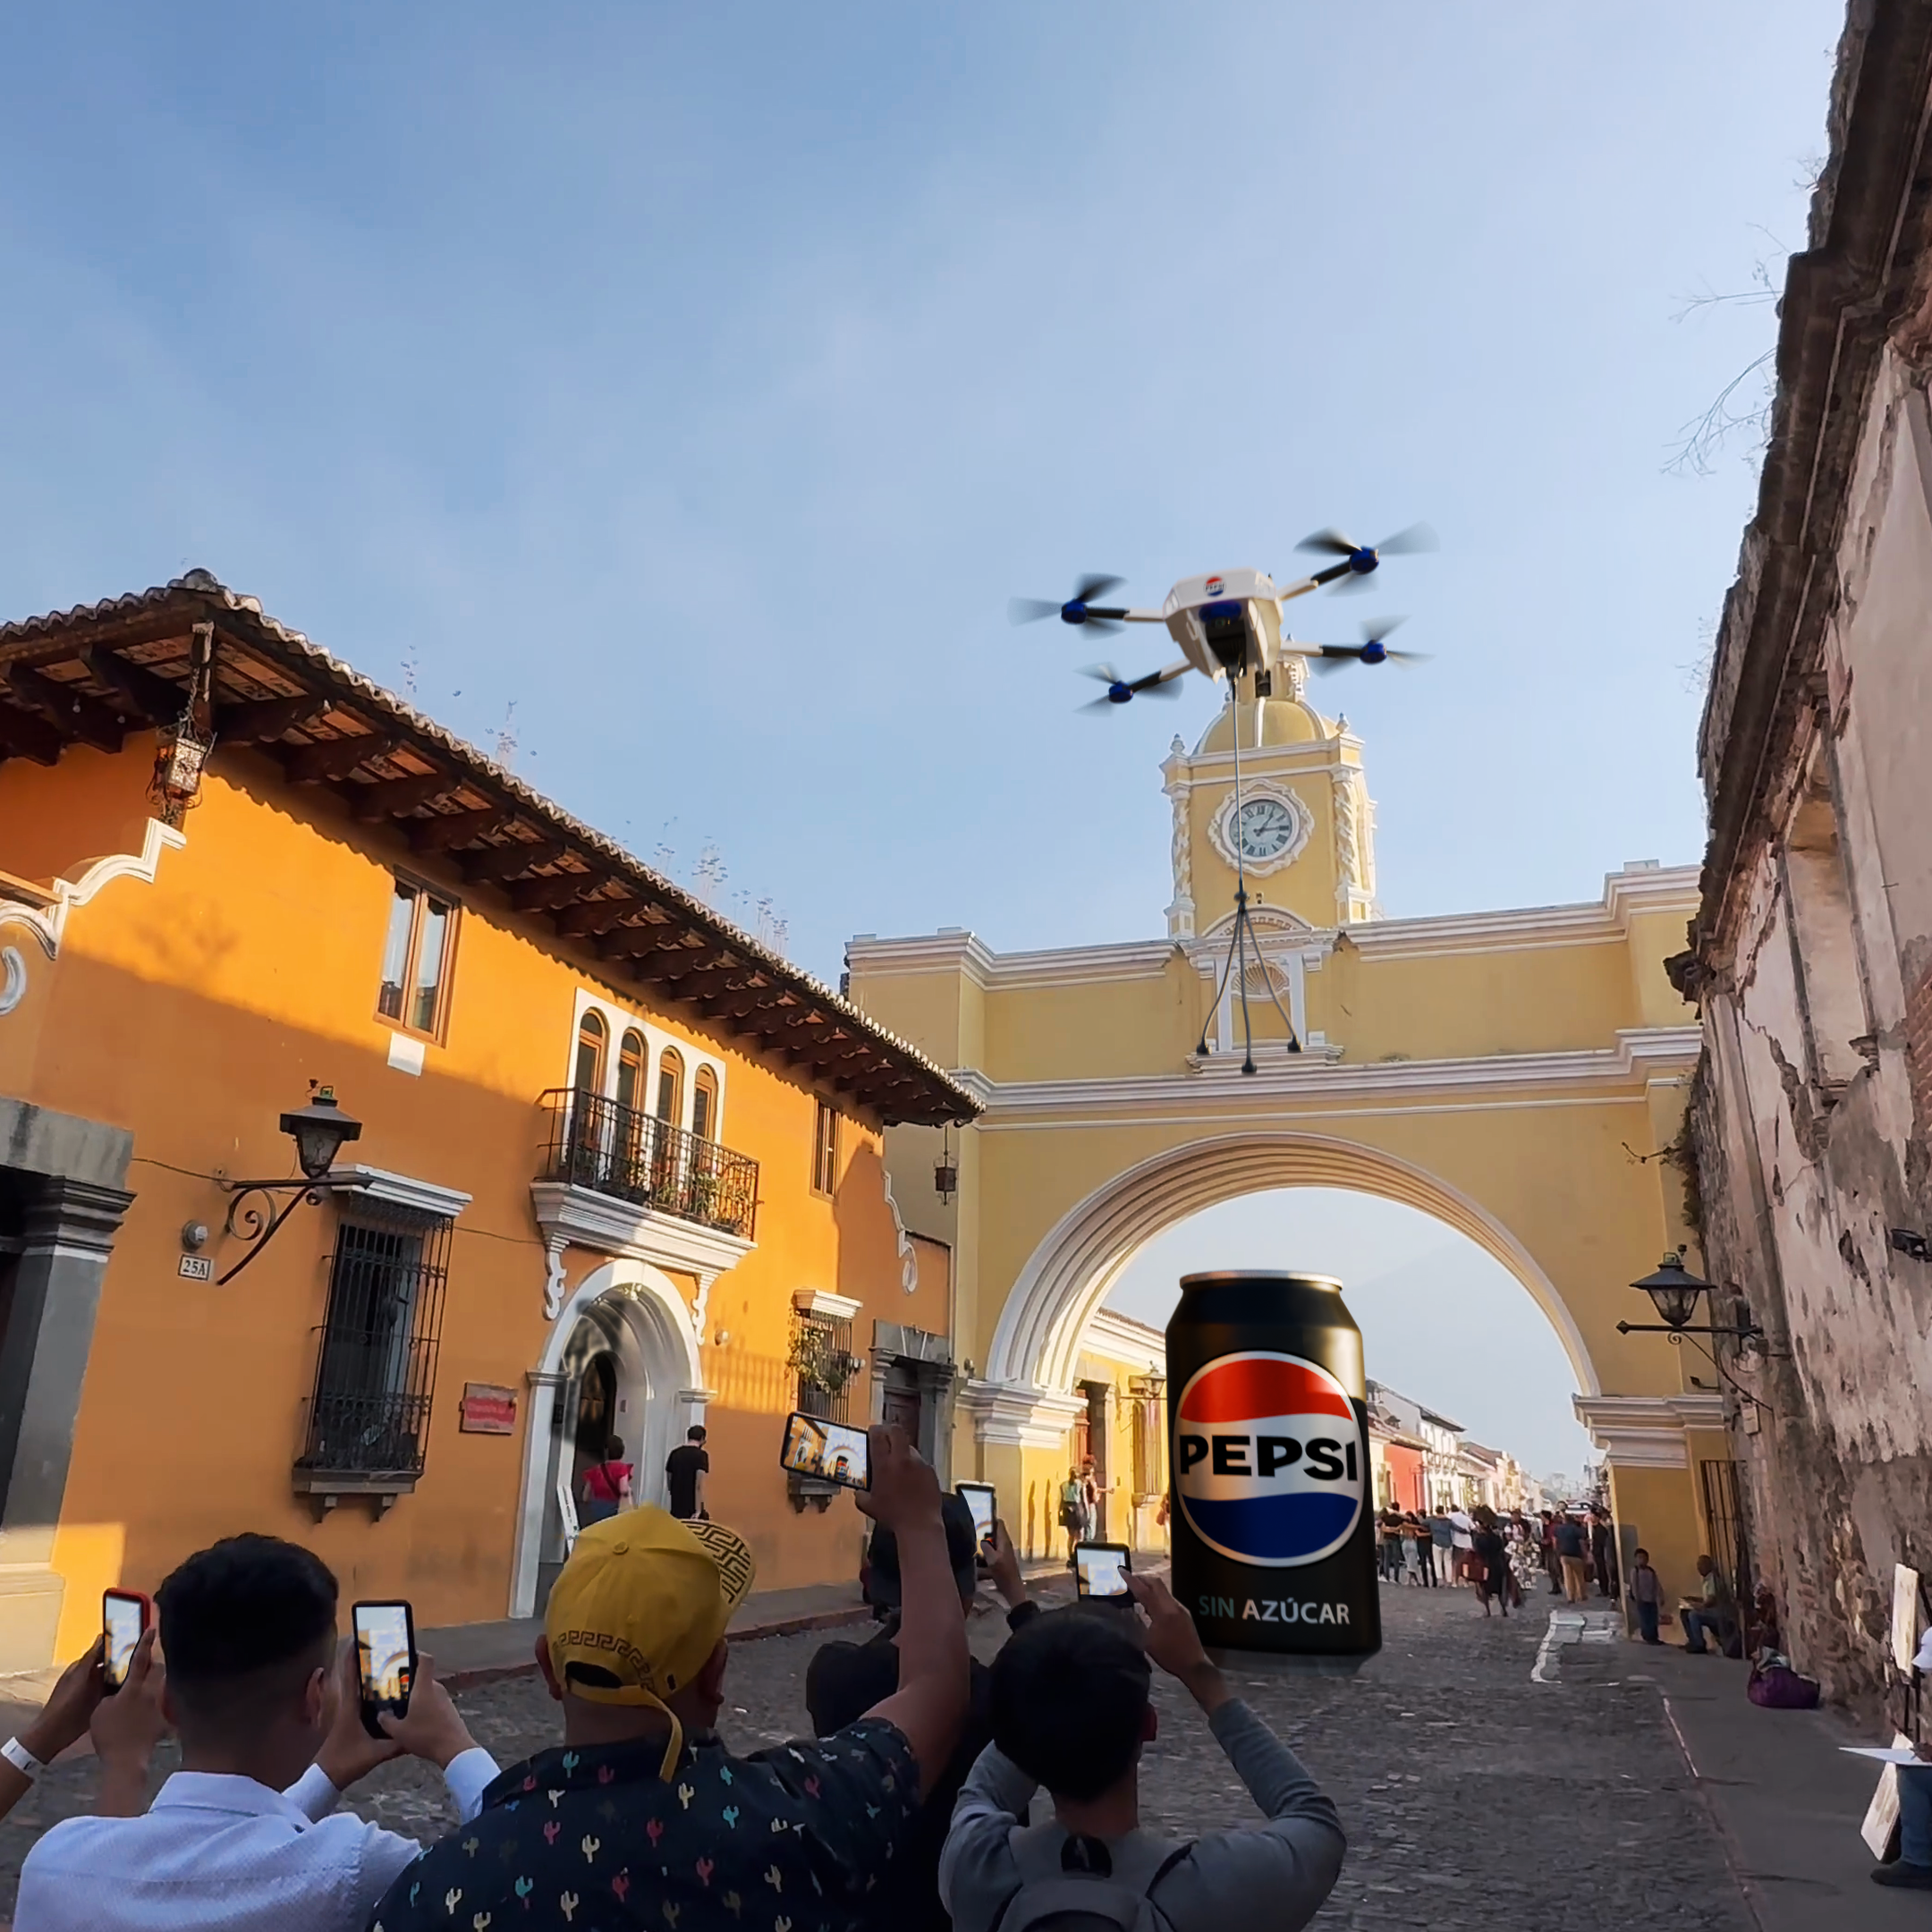 A drone flies over a crowded street by an archway as people take photos. There&#x27;s a large Pepsi can model below the drone